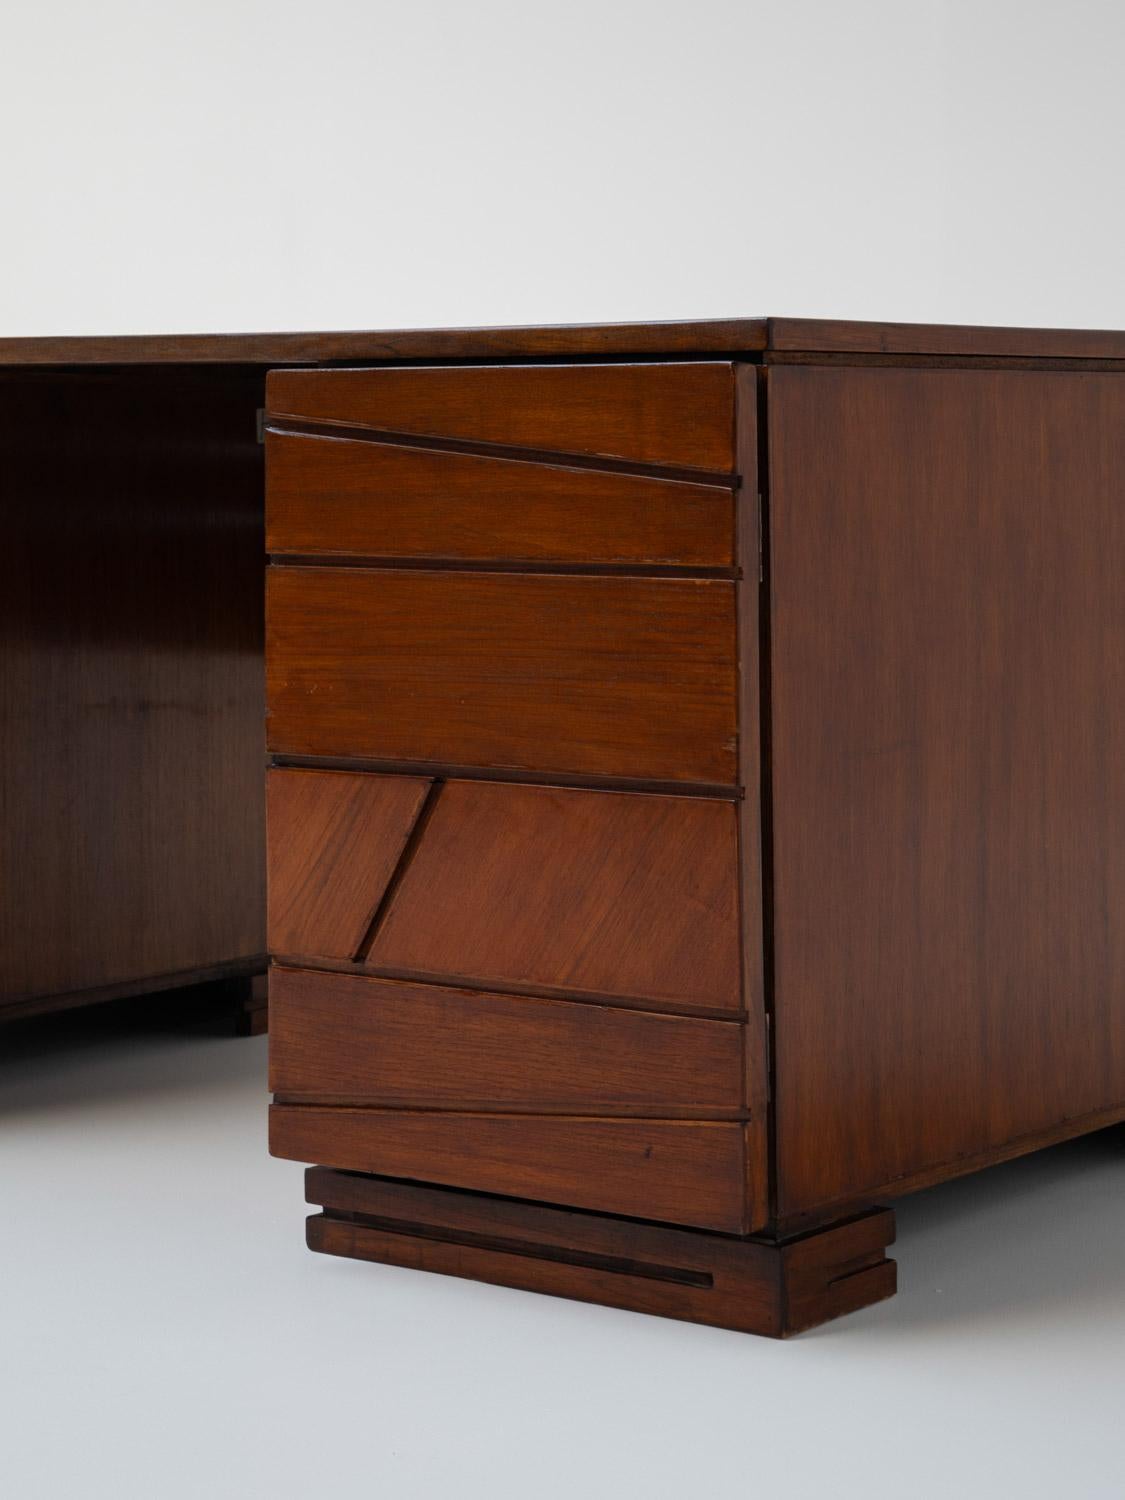 Late 20th Century French Wooden Modernist Desk, France 1970s